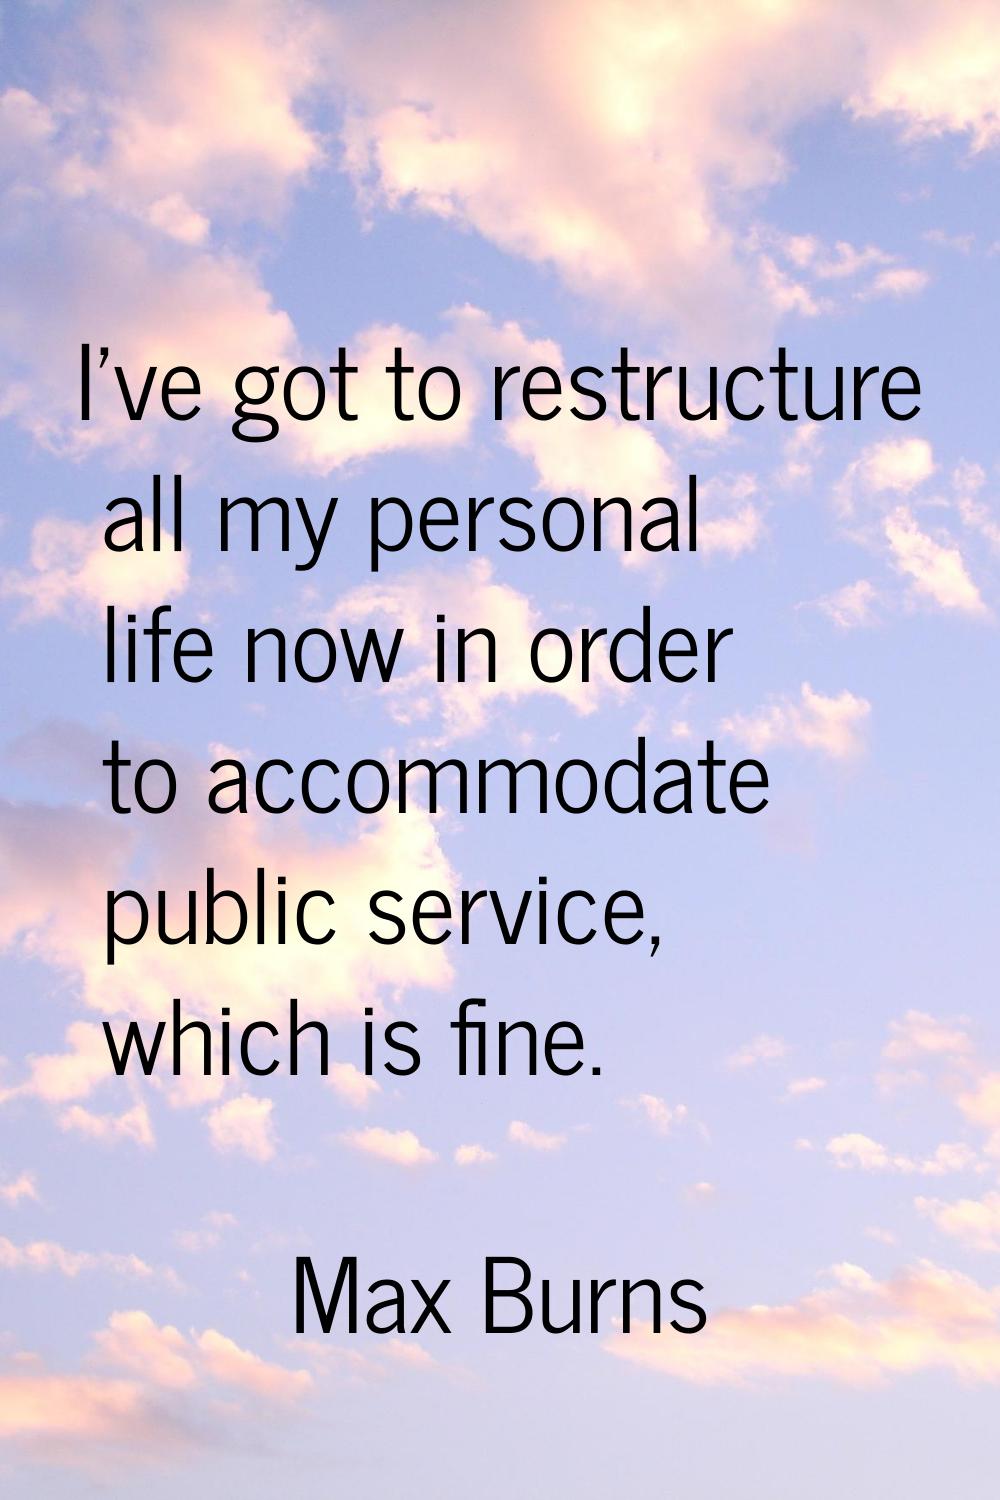 I've got to restructure all my personal life now in order to accommodate public service, which is f